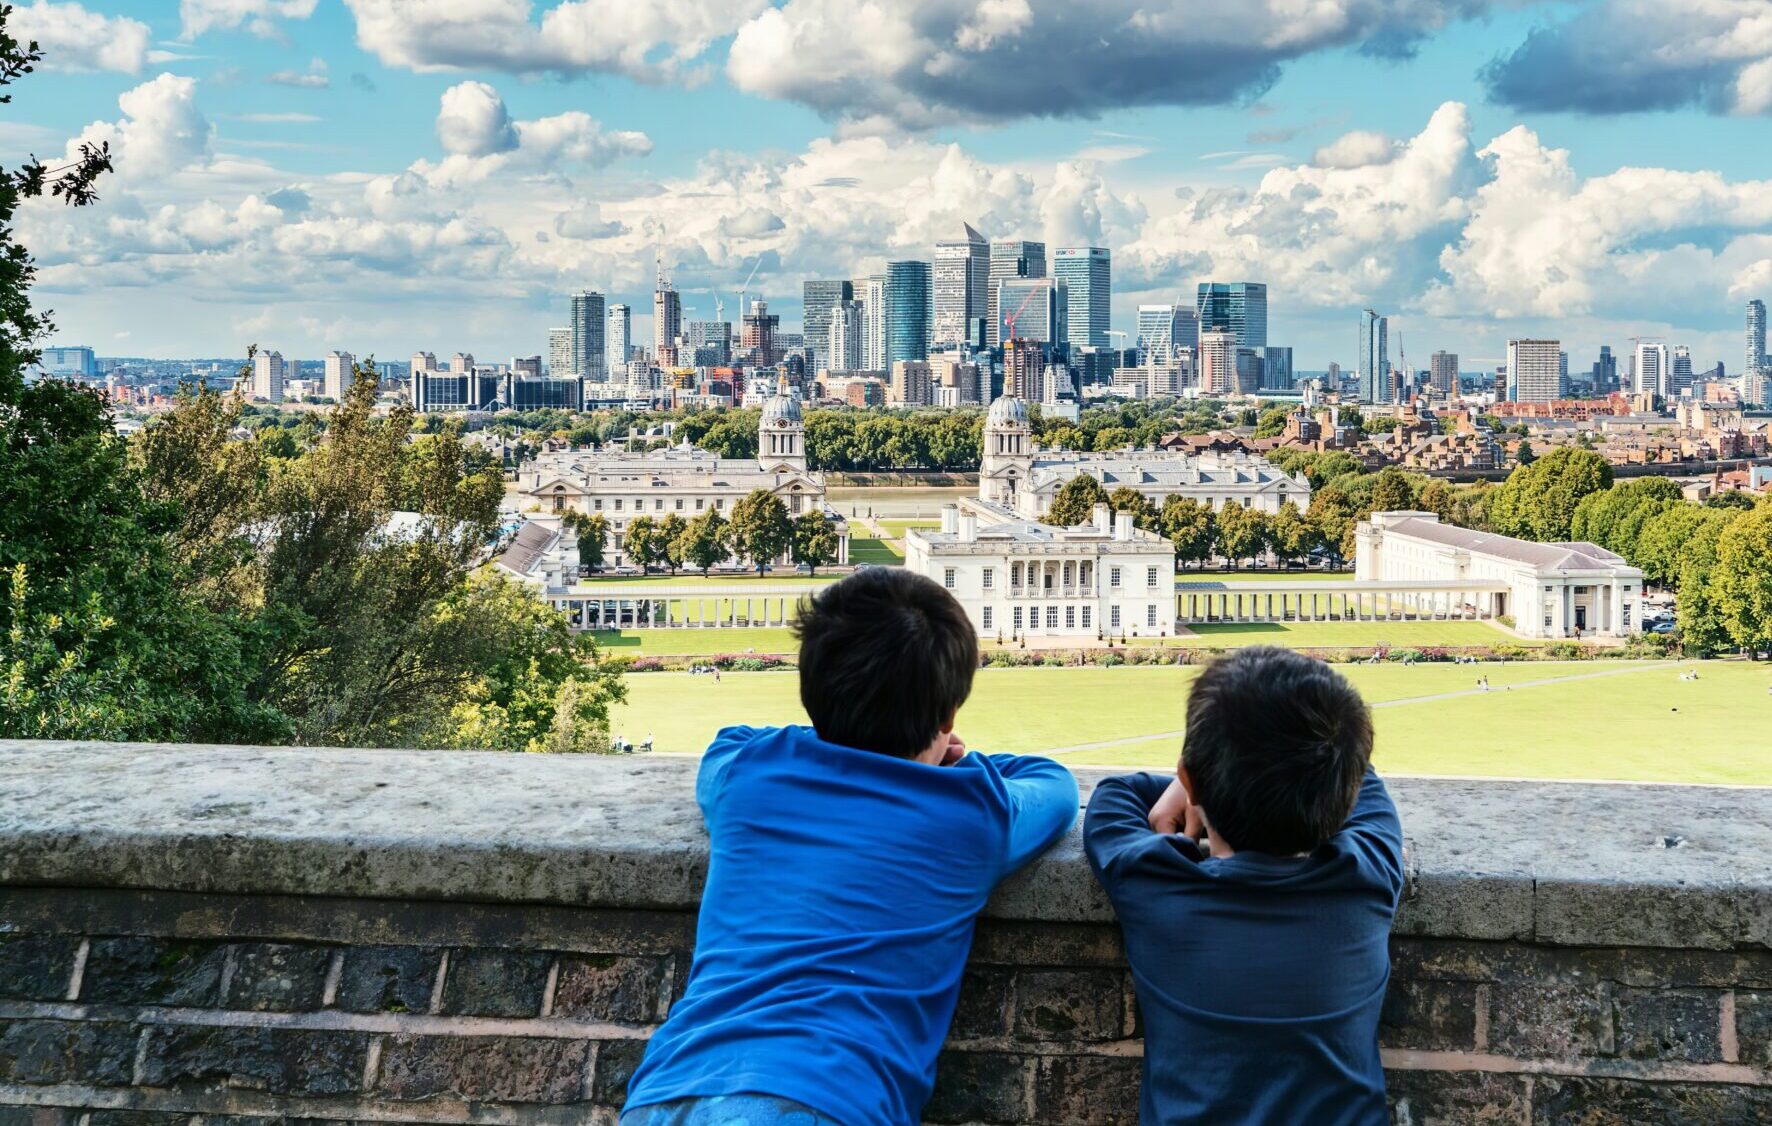 Children look out over London, photograph by Fas Khan